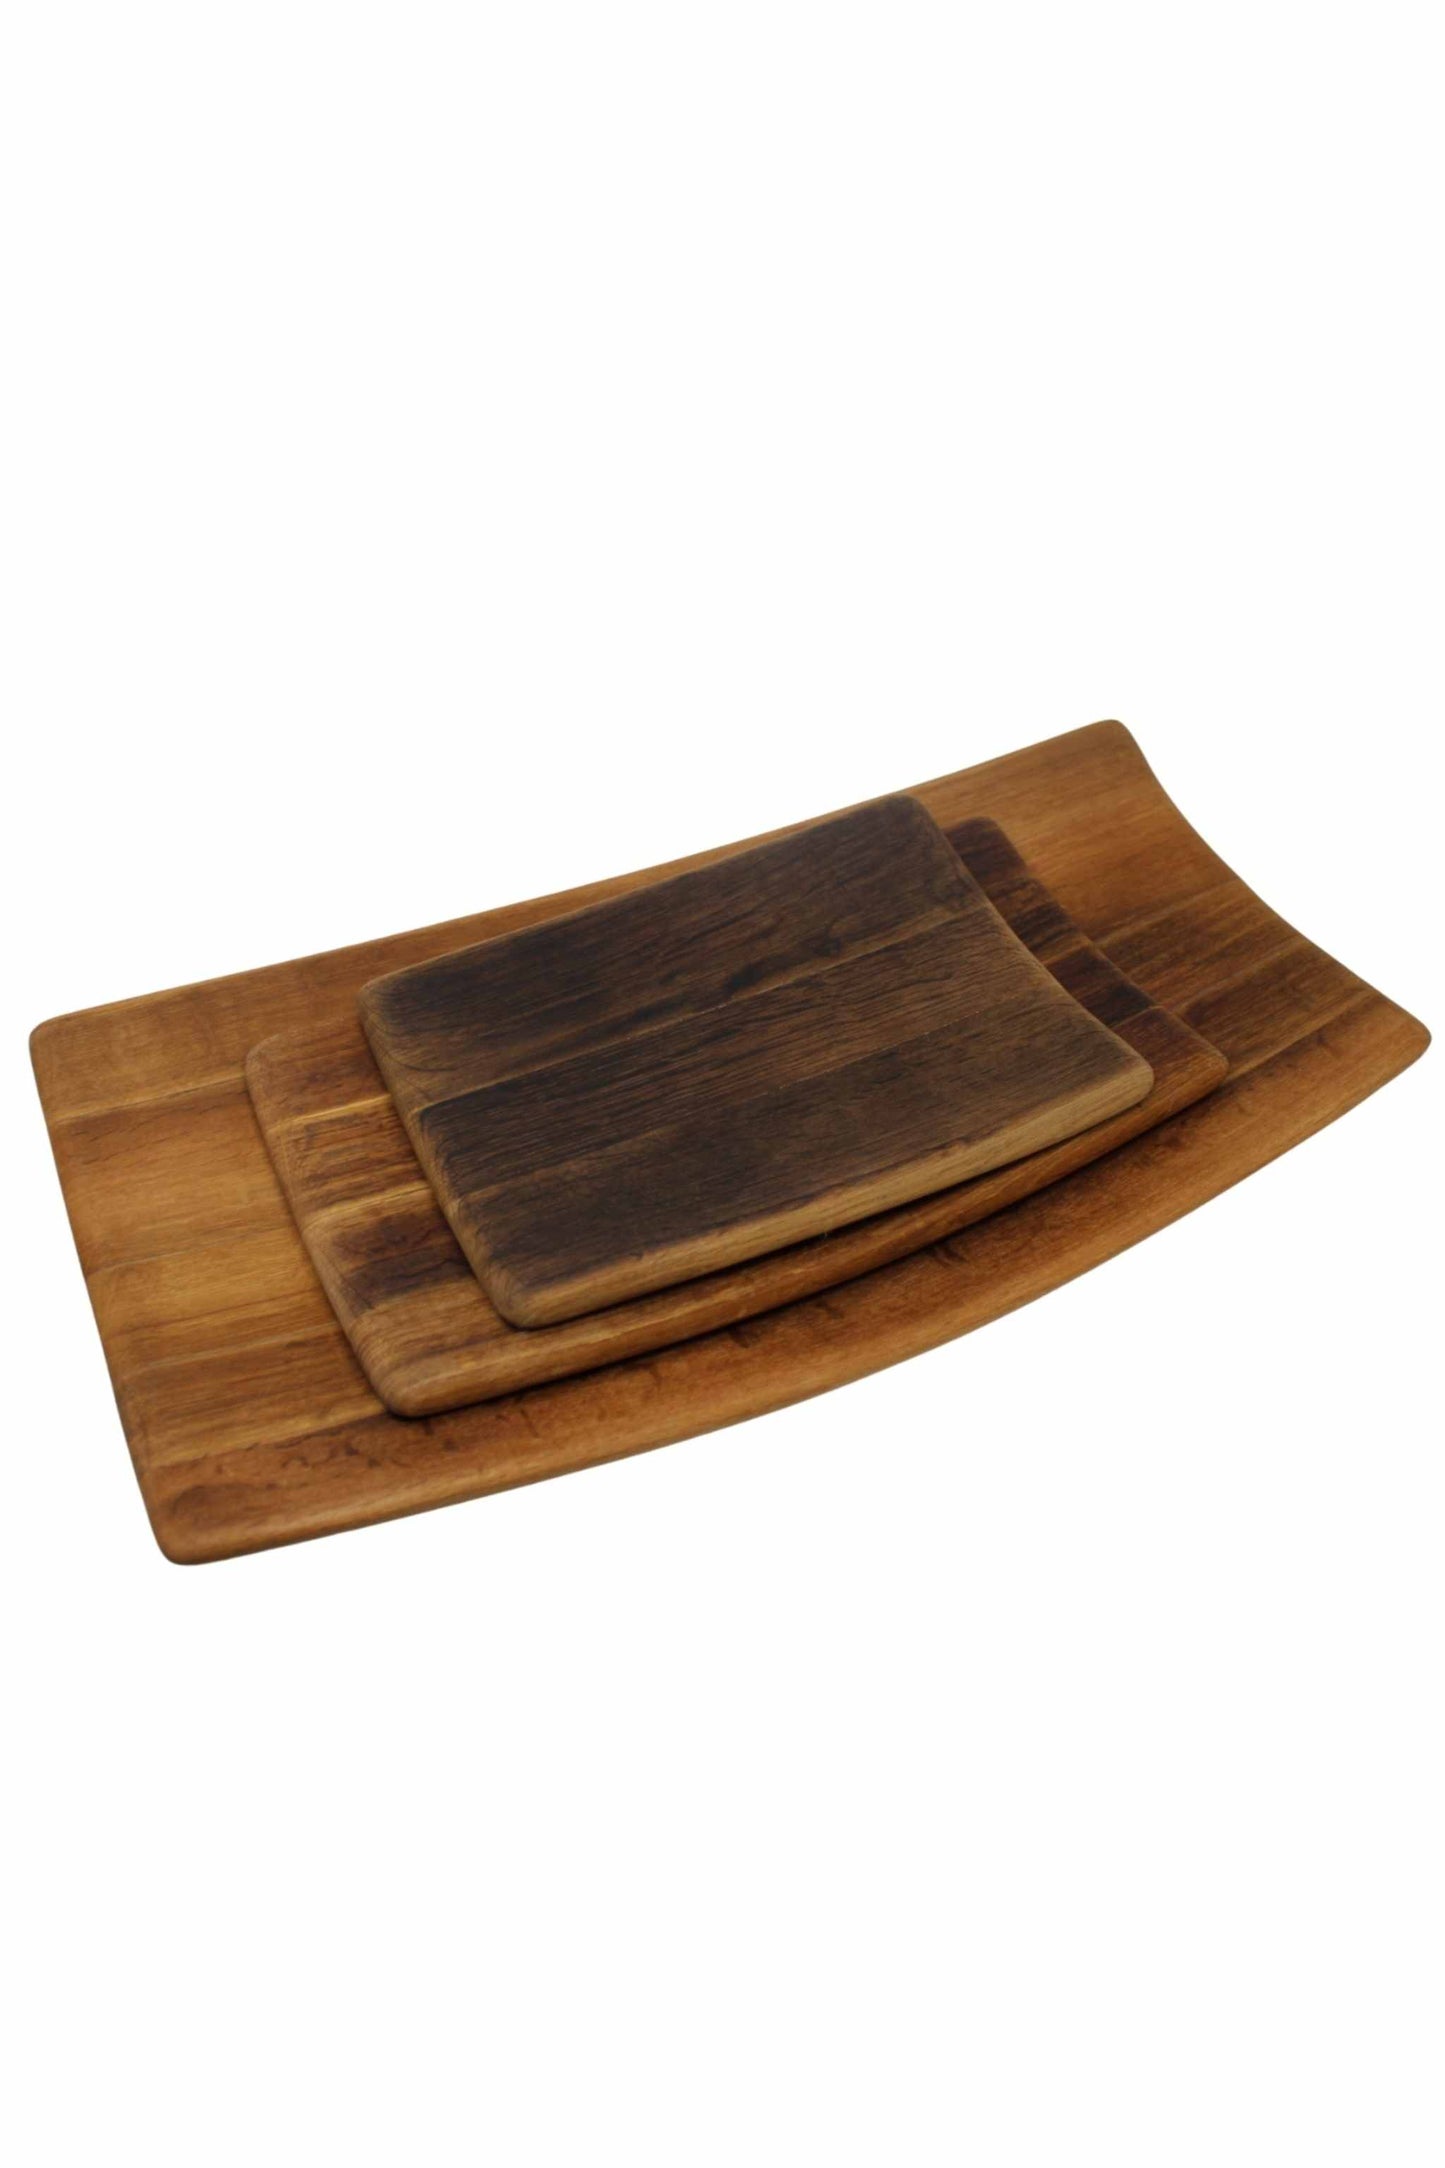 Three sizes of wine barrel platters grouped together side view